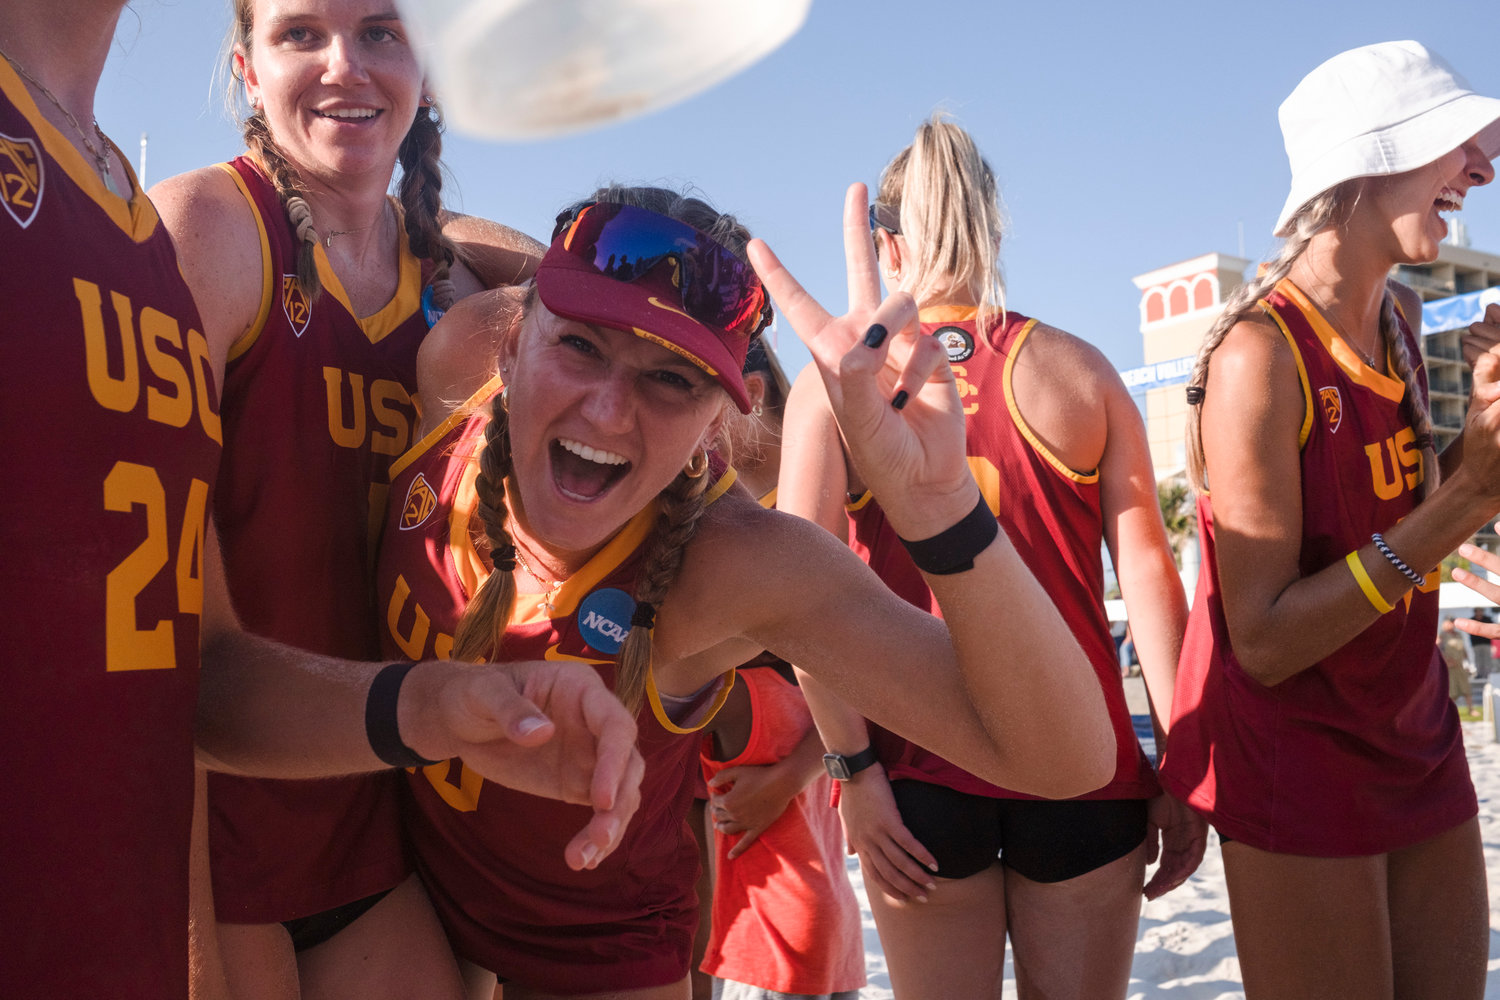 The USC Women of Troy claimed their second straight beach volleyball championship last spring at Gulf Place Beach. They’ll look to defend their crown when the tournament returns May 5-7, albeit with a little different format.